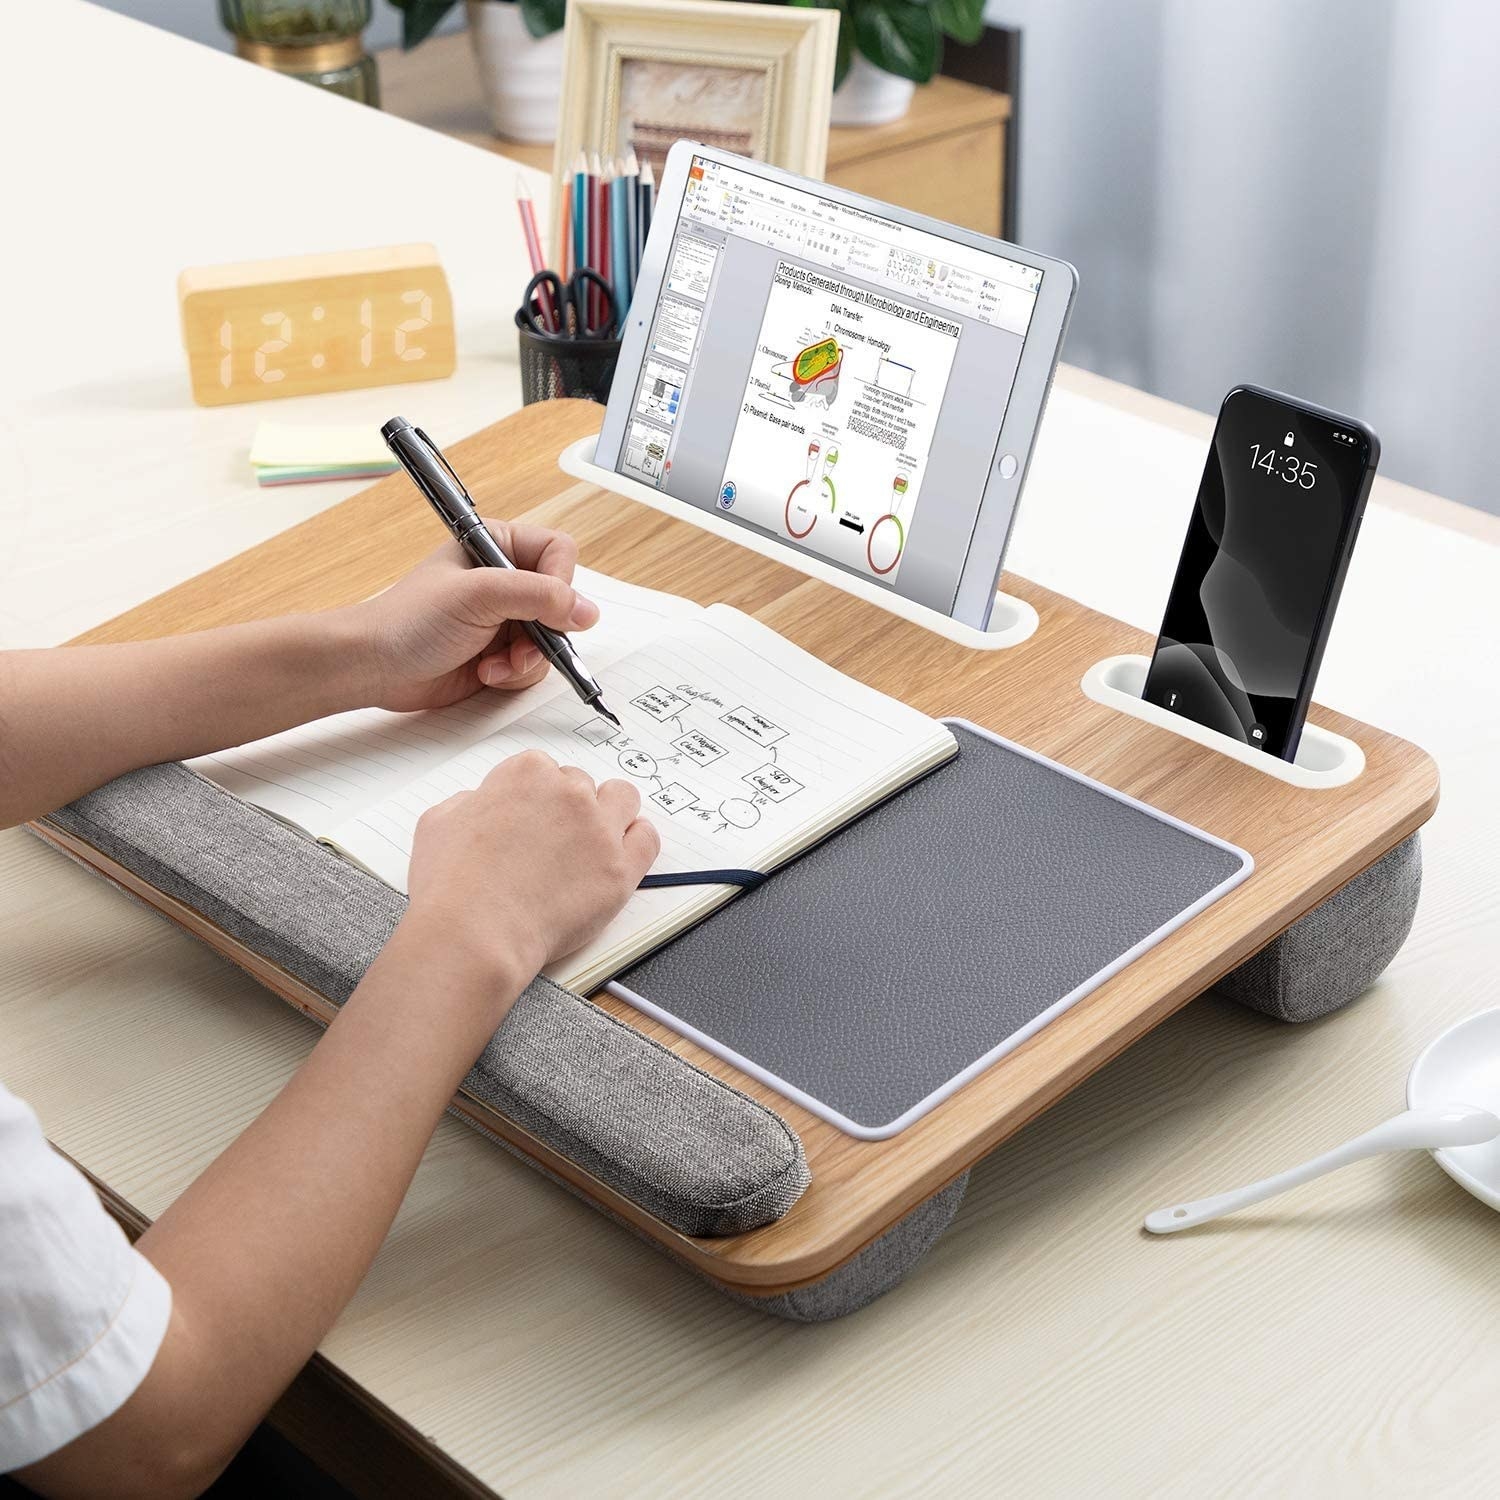 A person using the lap desk on a desk